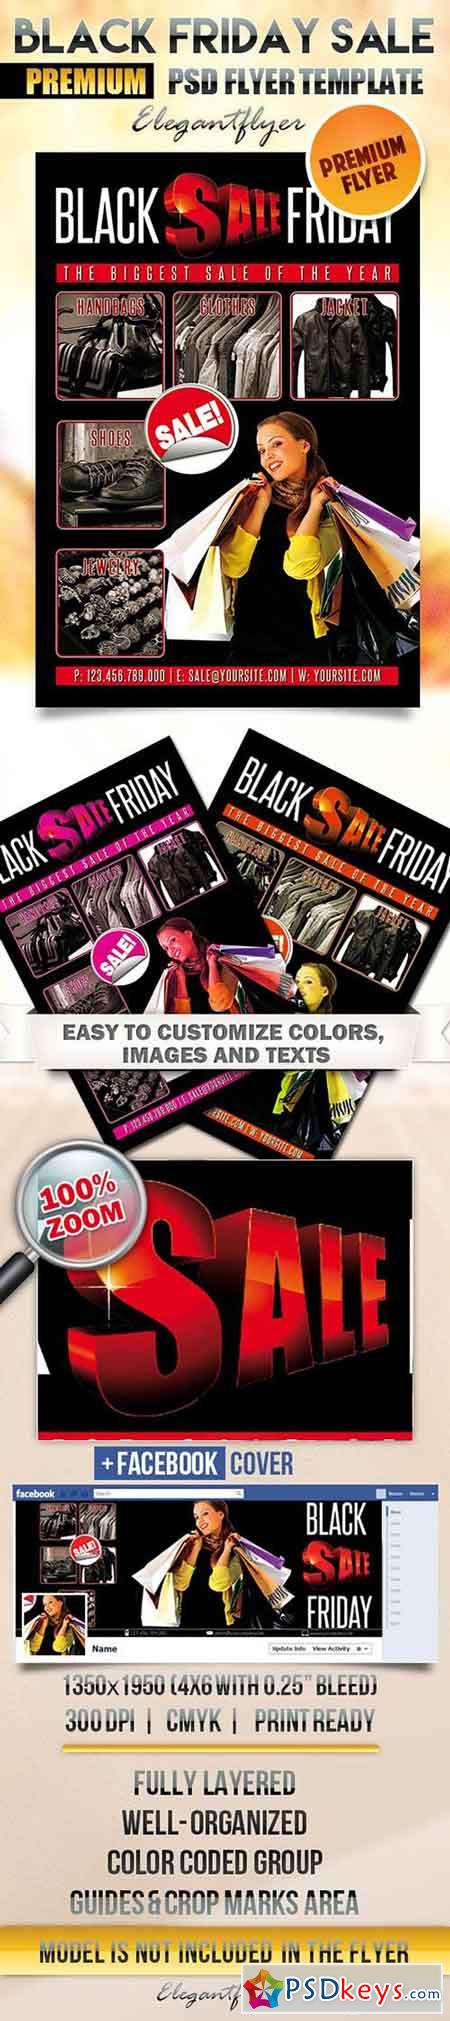 Black Friday Sale Flyer PSD Template + Facebook Cover